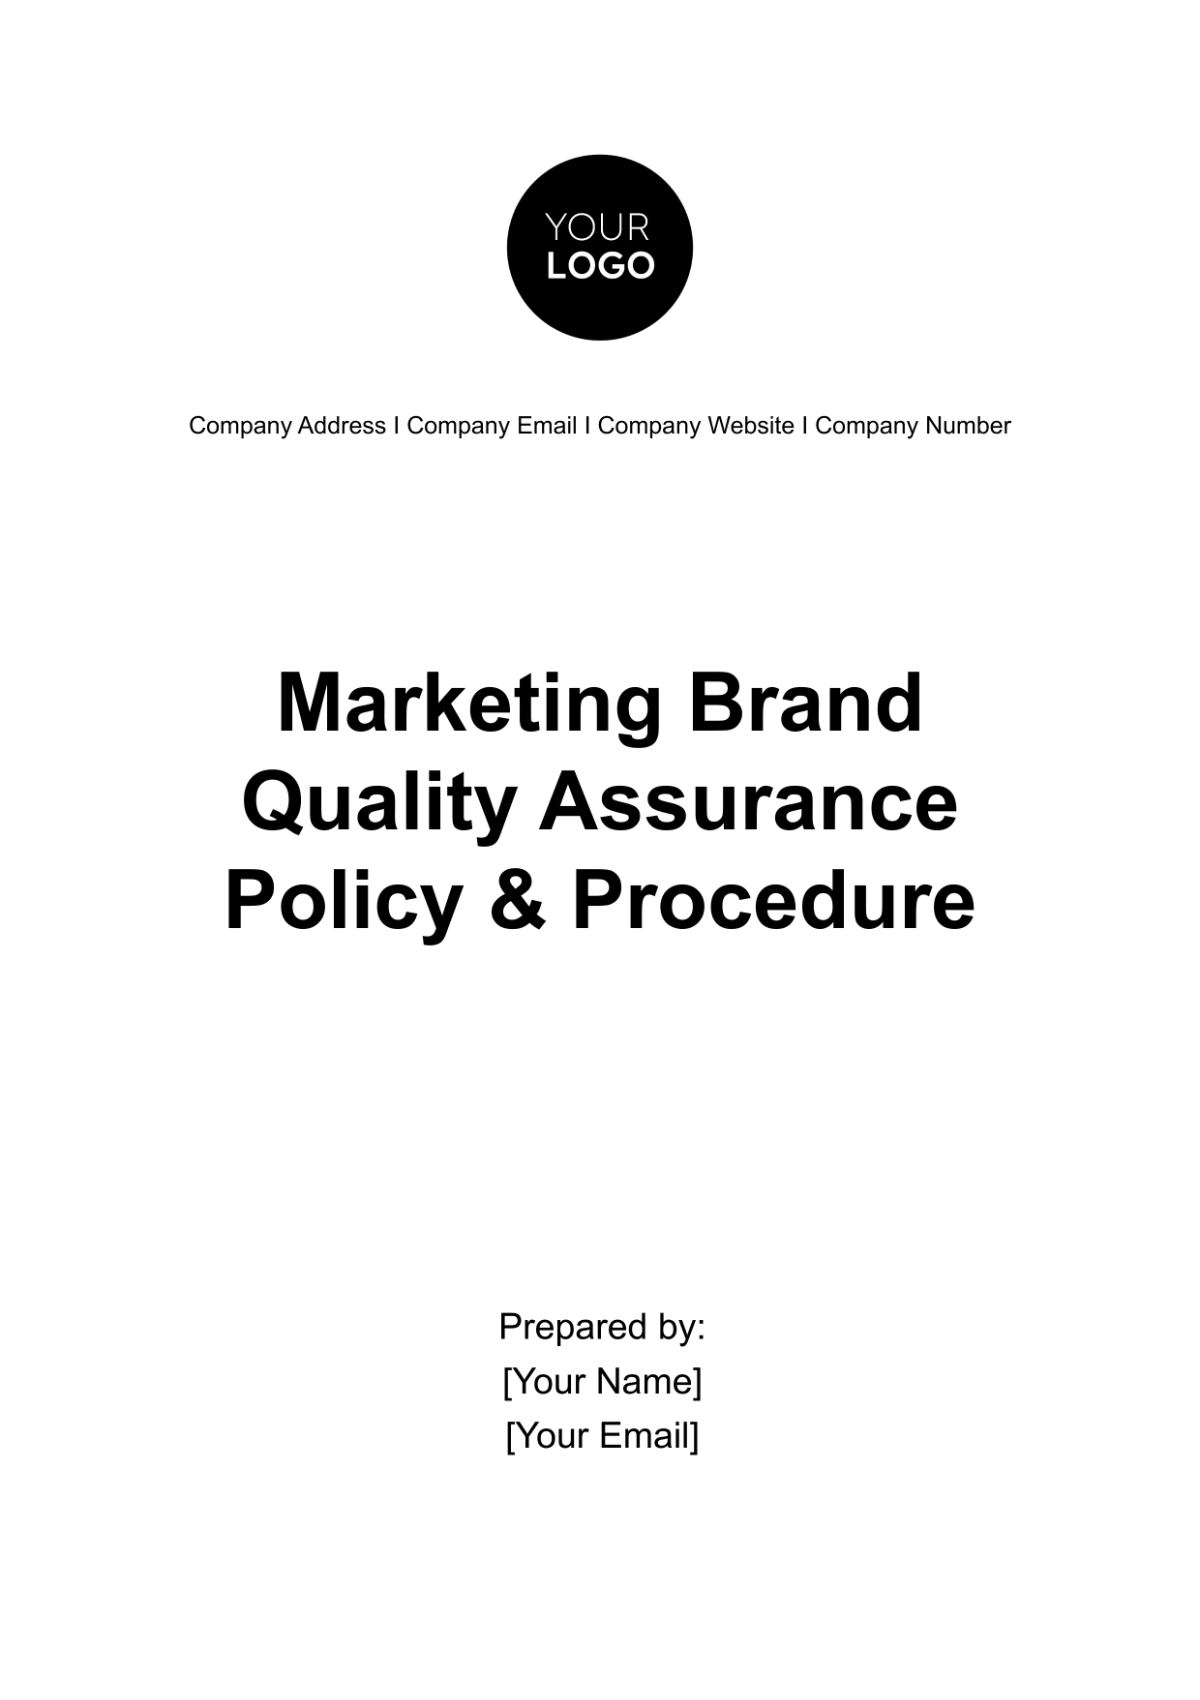 Free Marketing Brand Quality Assurance Policy & Procedure Template